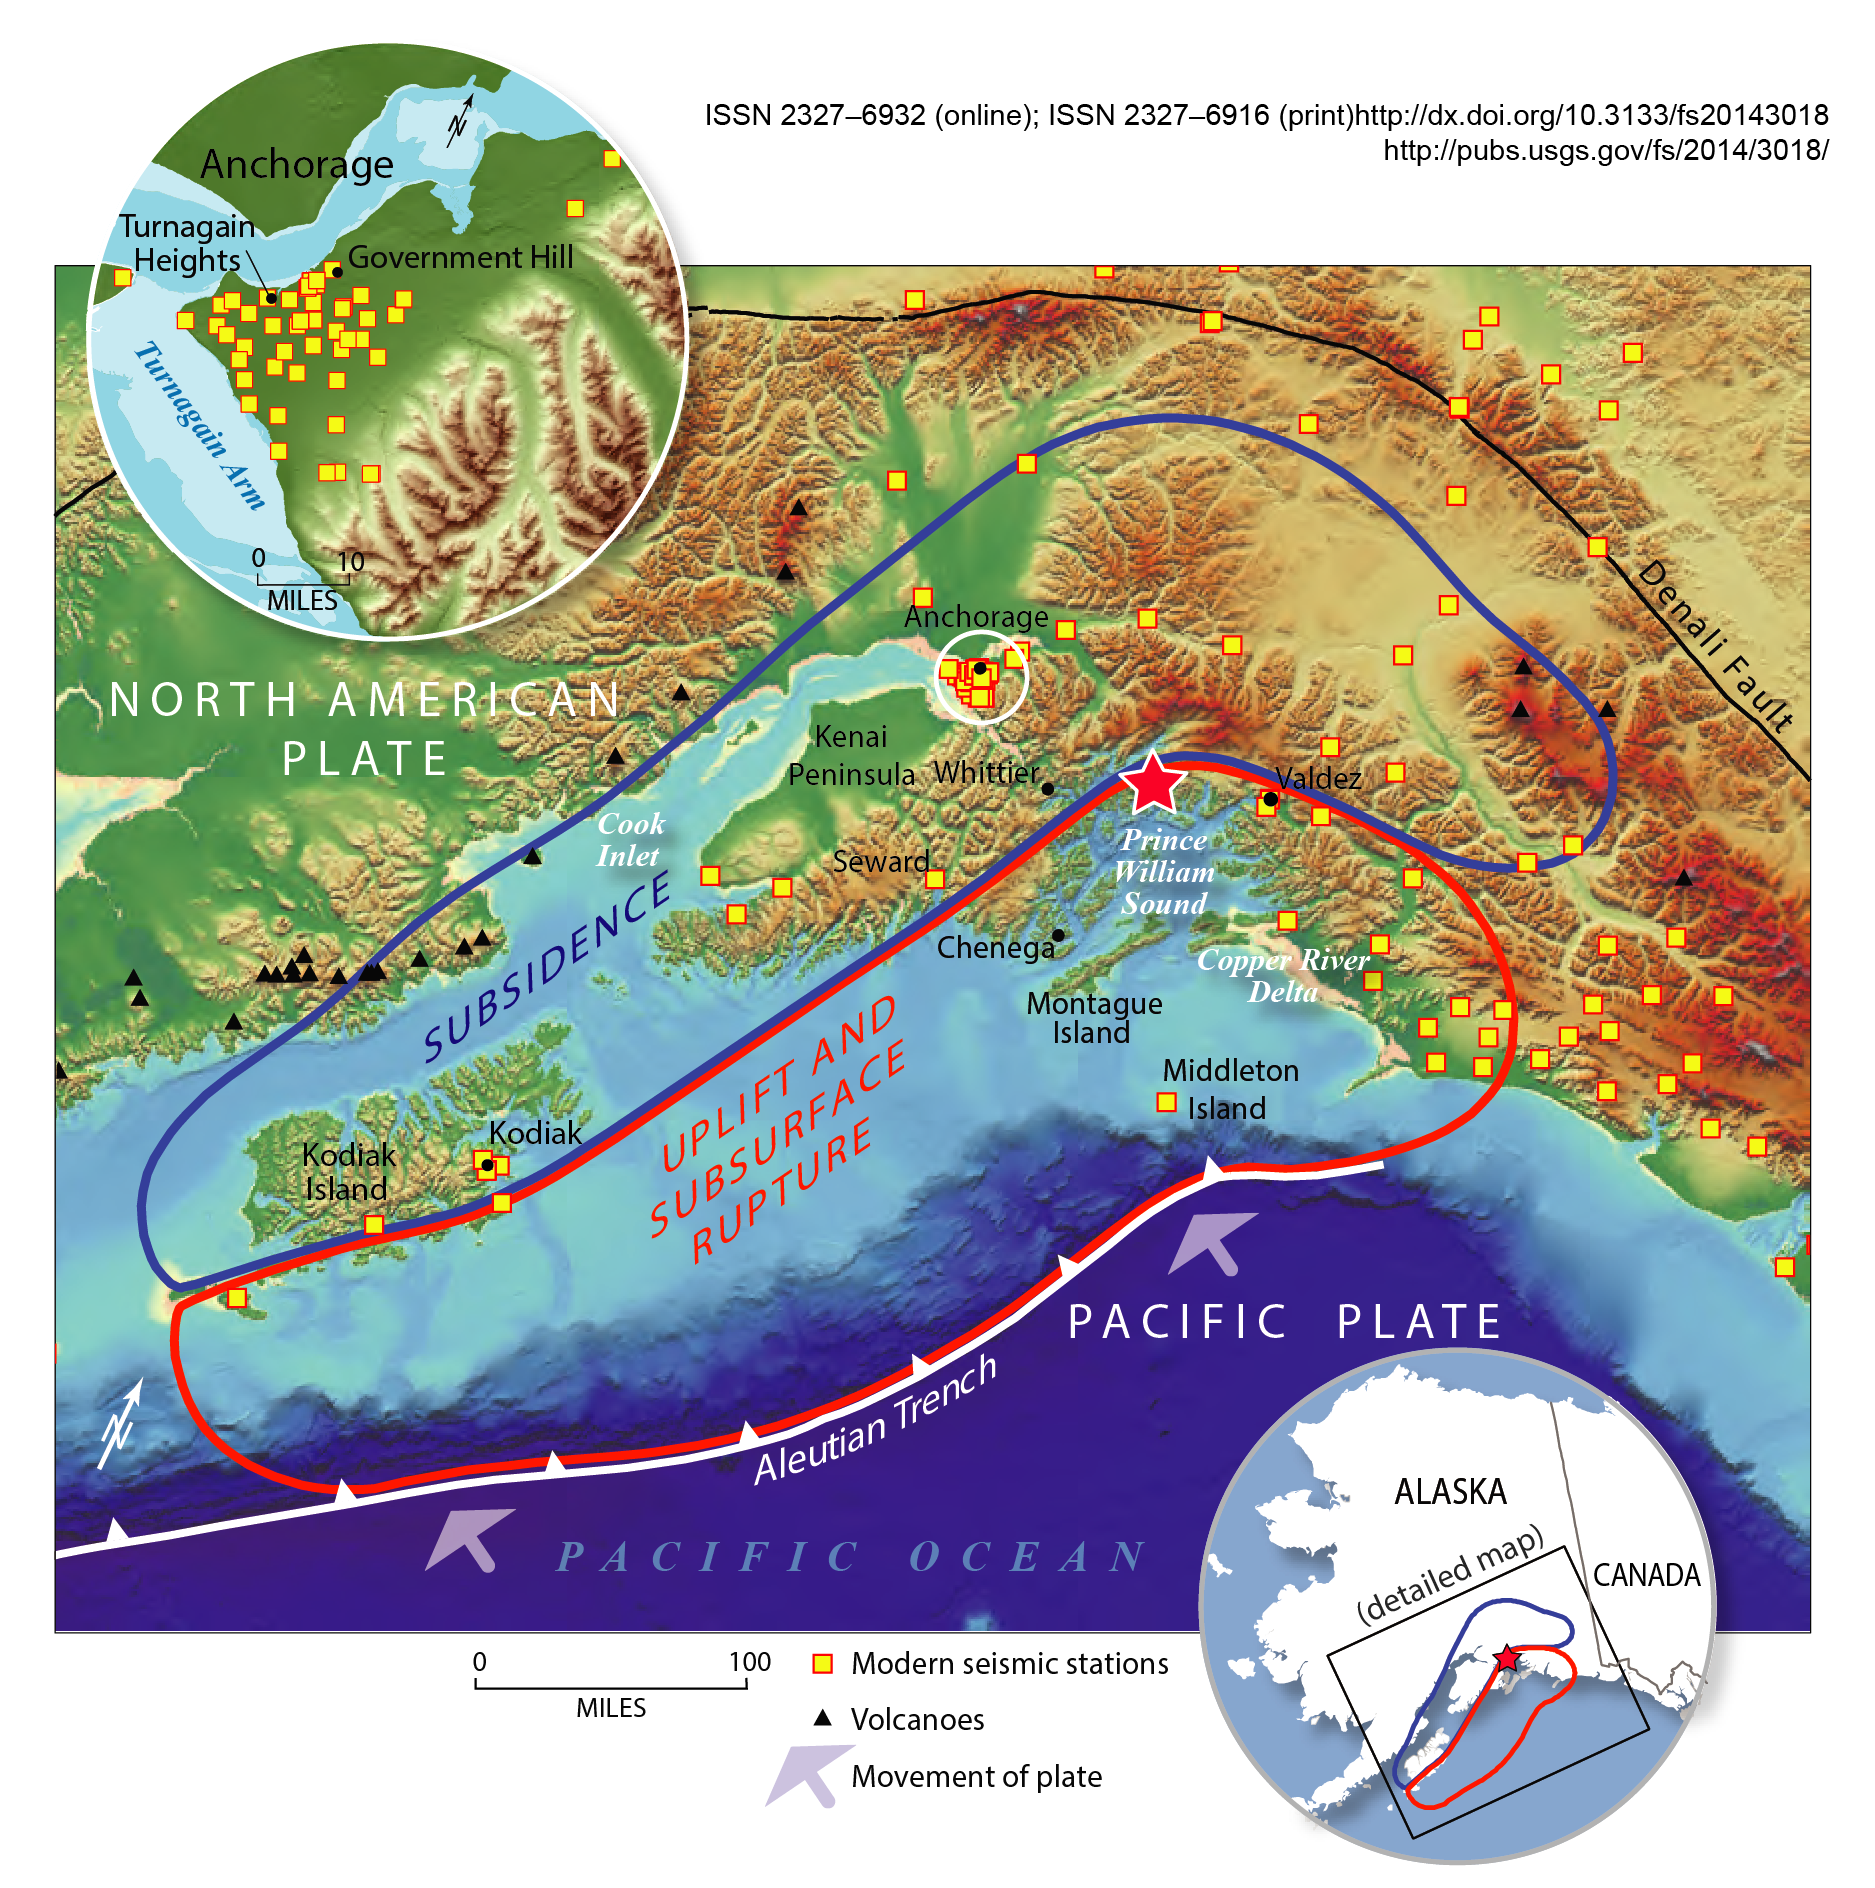 Areas of uplift and subsidence during the 1964 Great Alaska Earthquake.